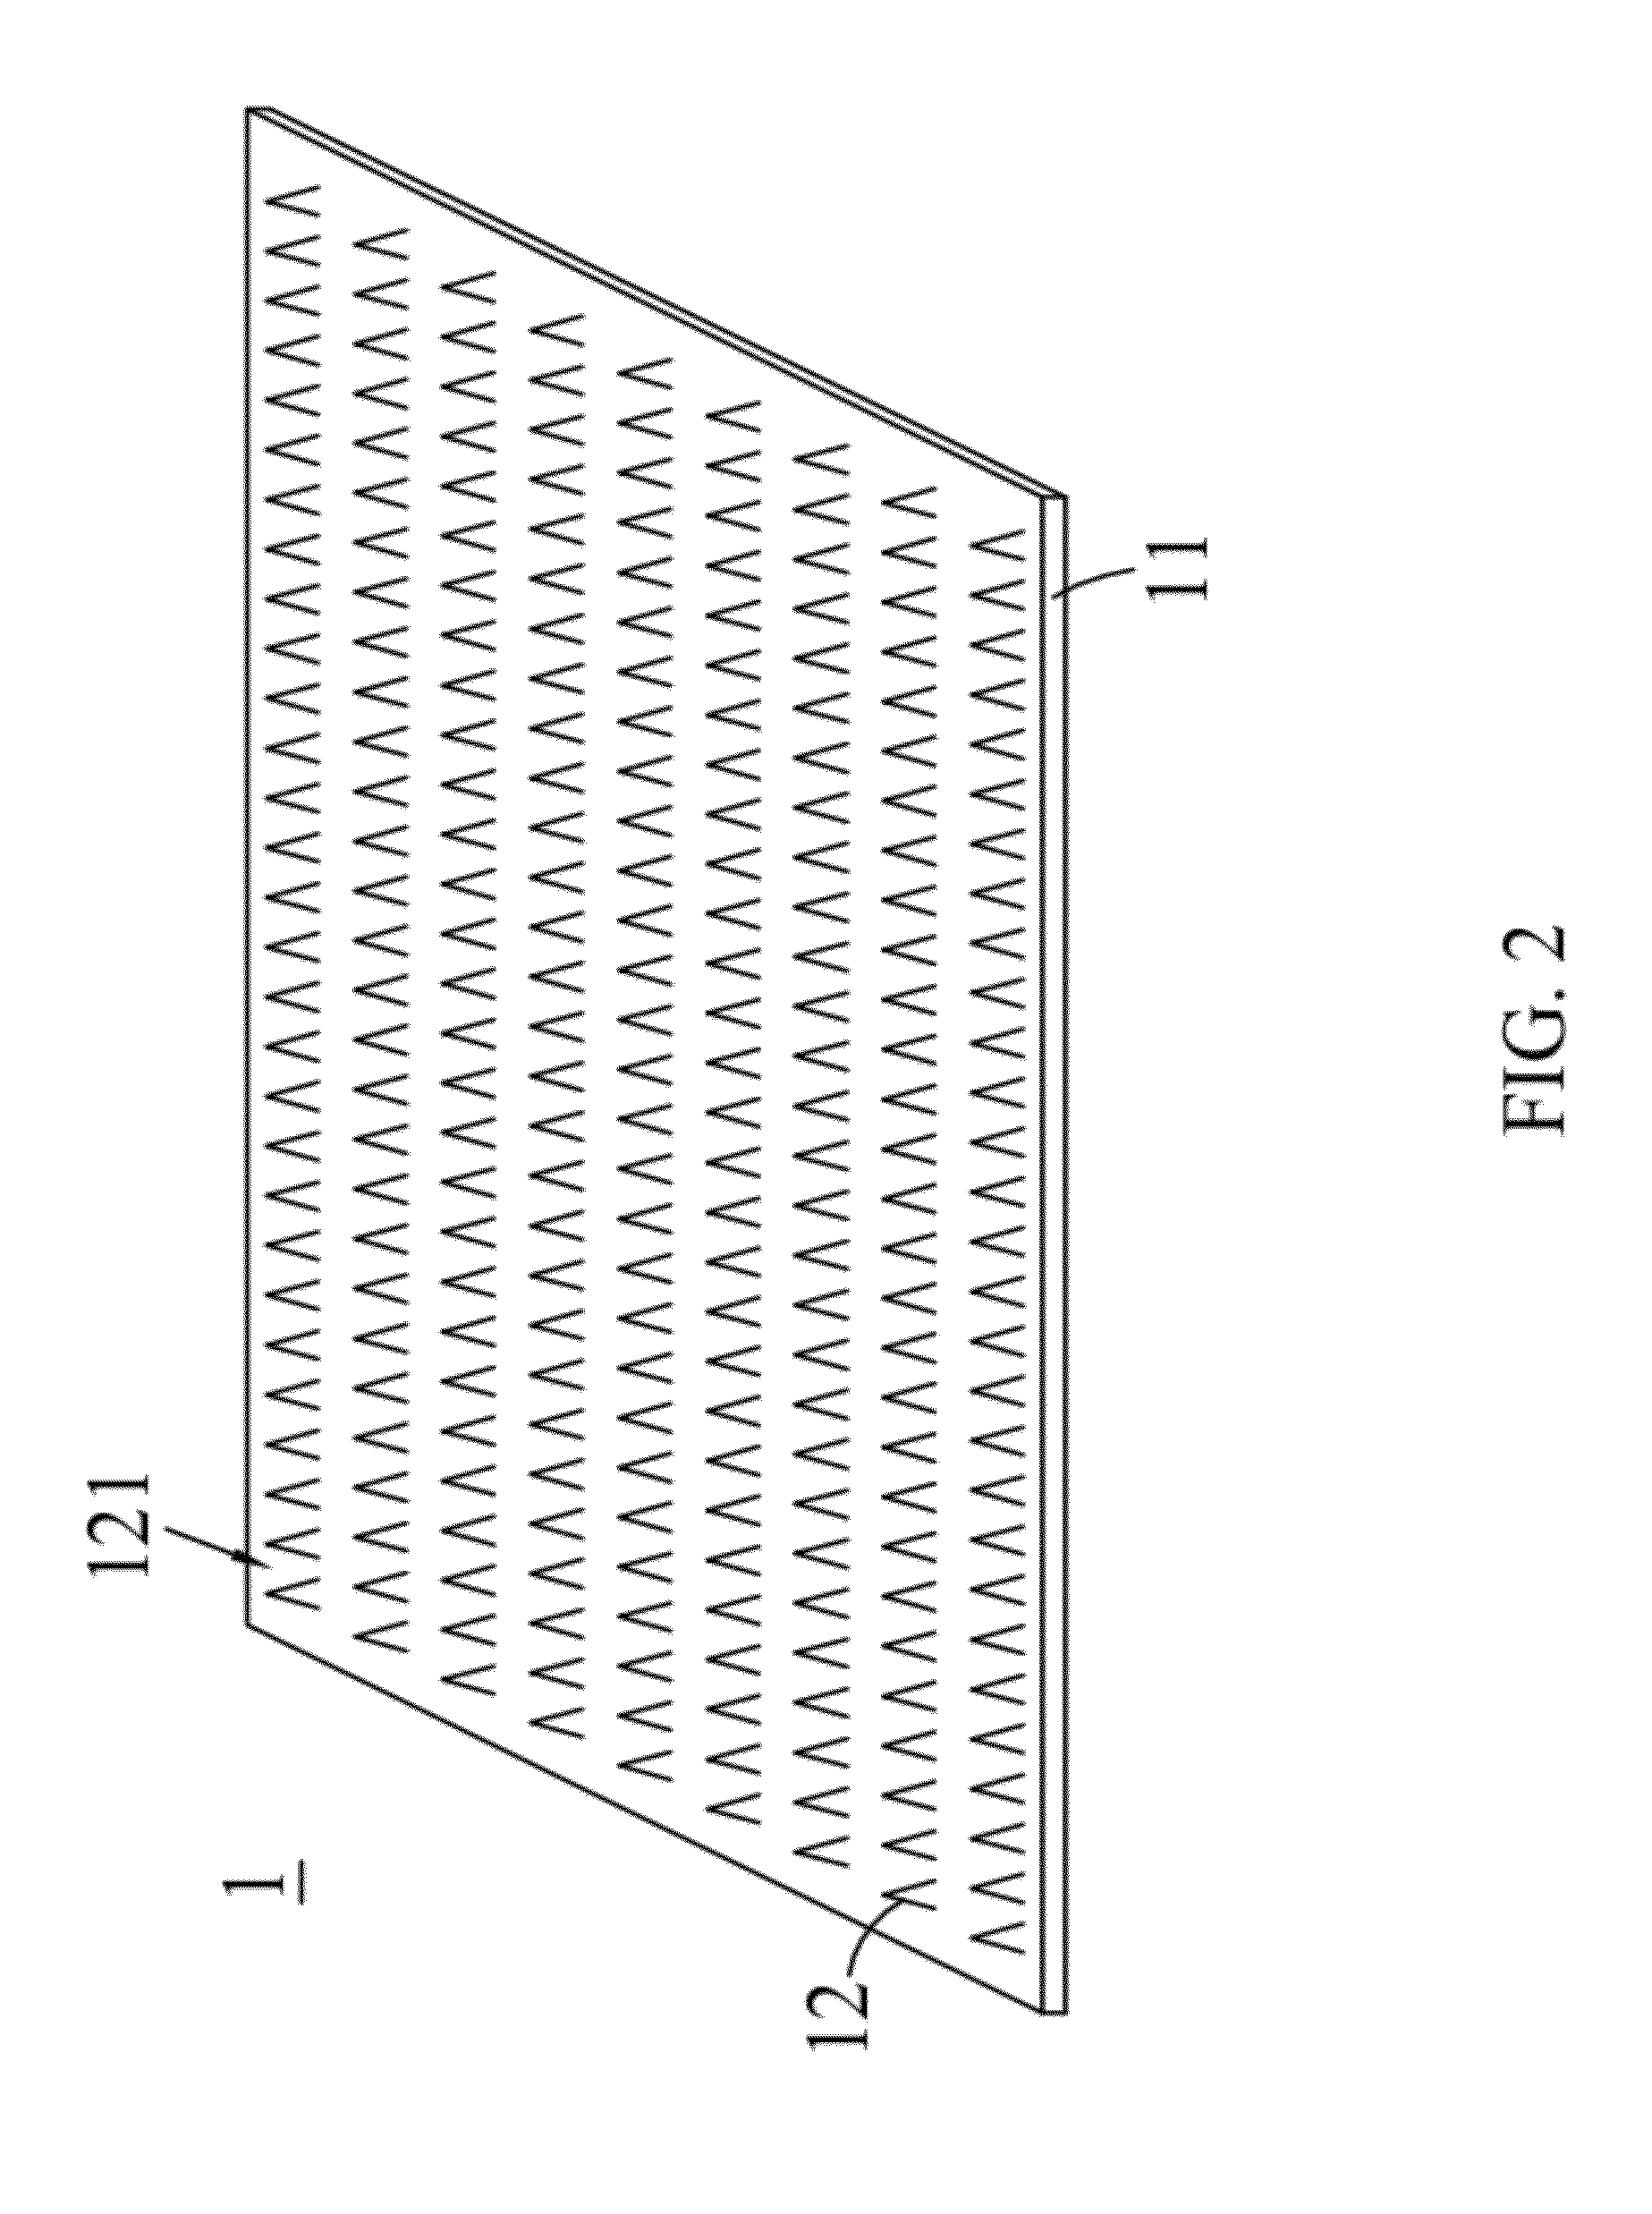 Transdermal drug delivery patch and method of controlling drug release of the same by near-ir